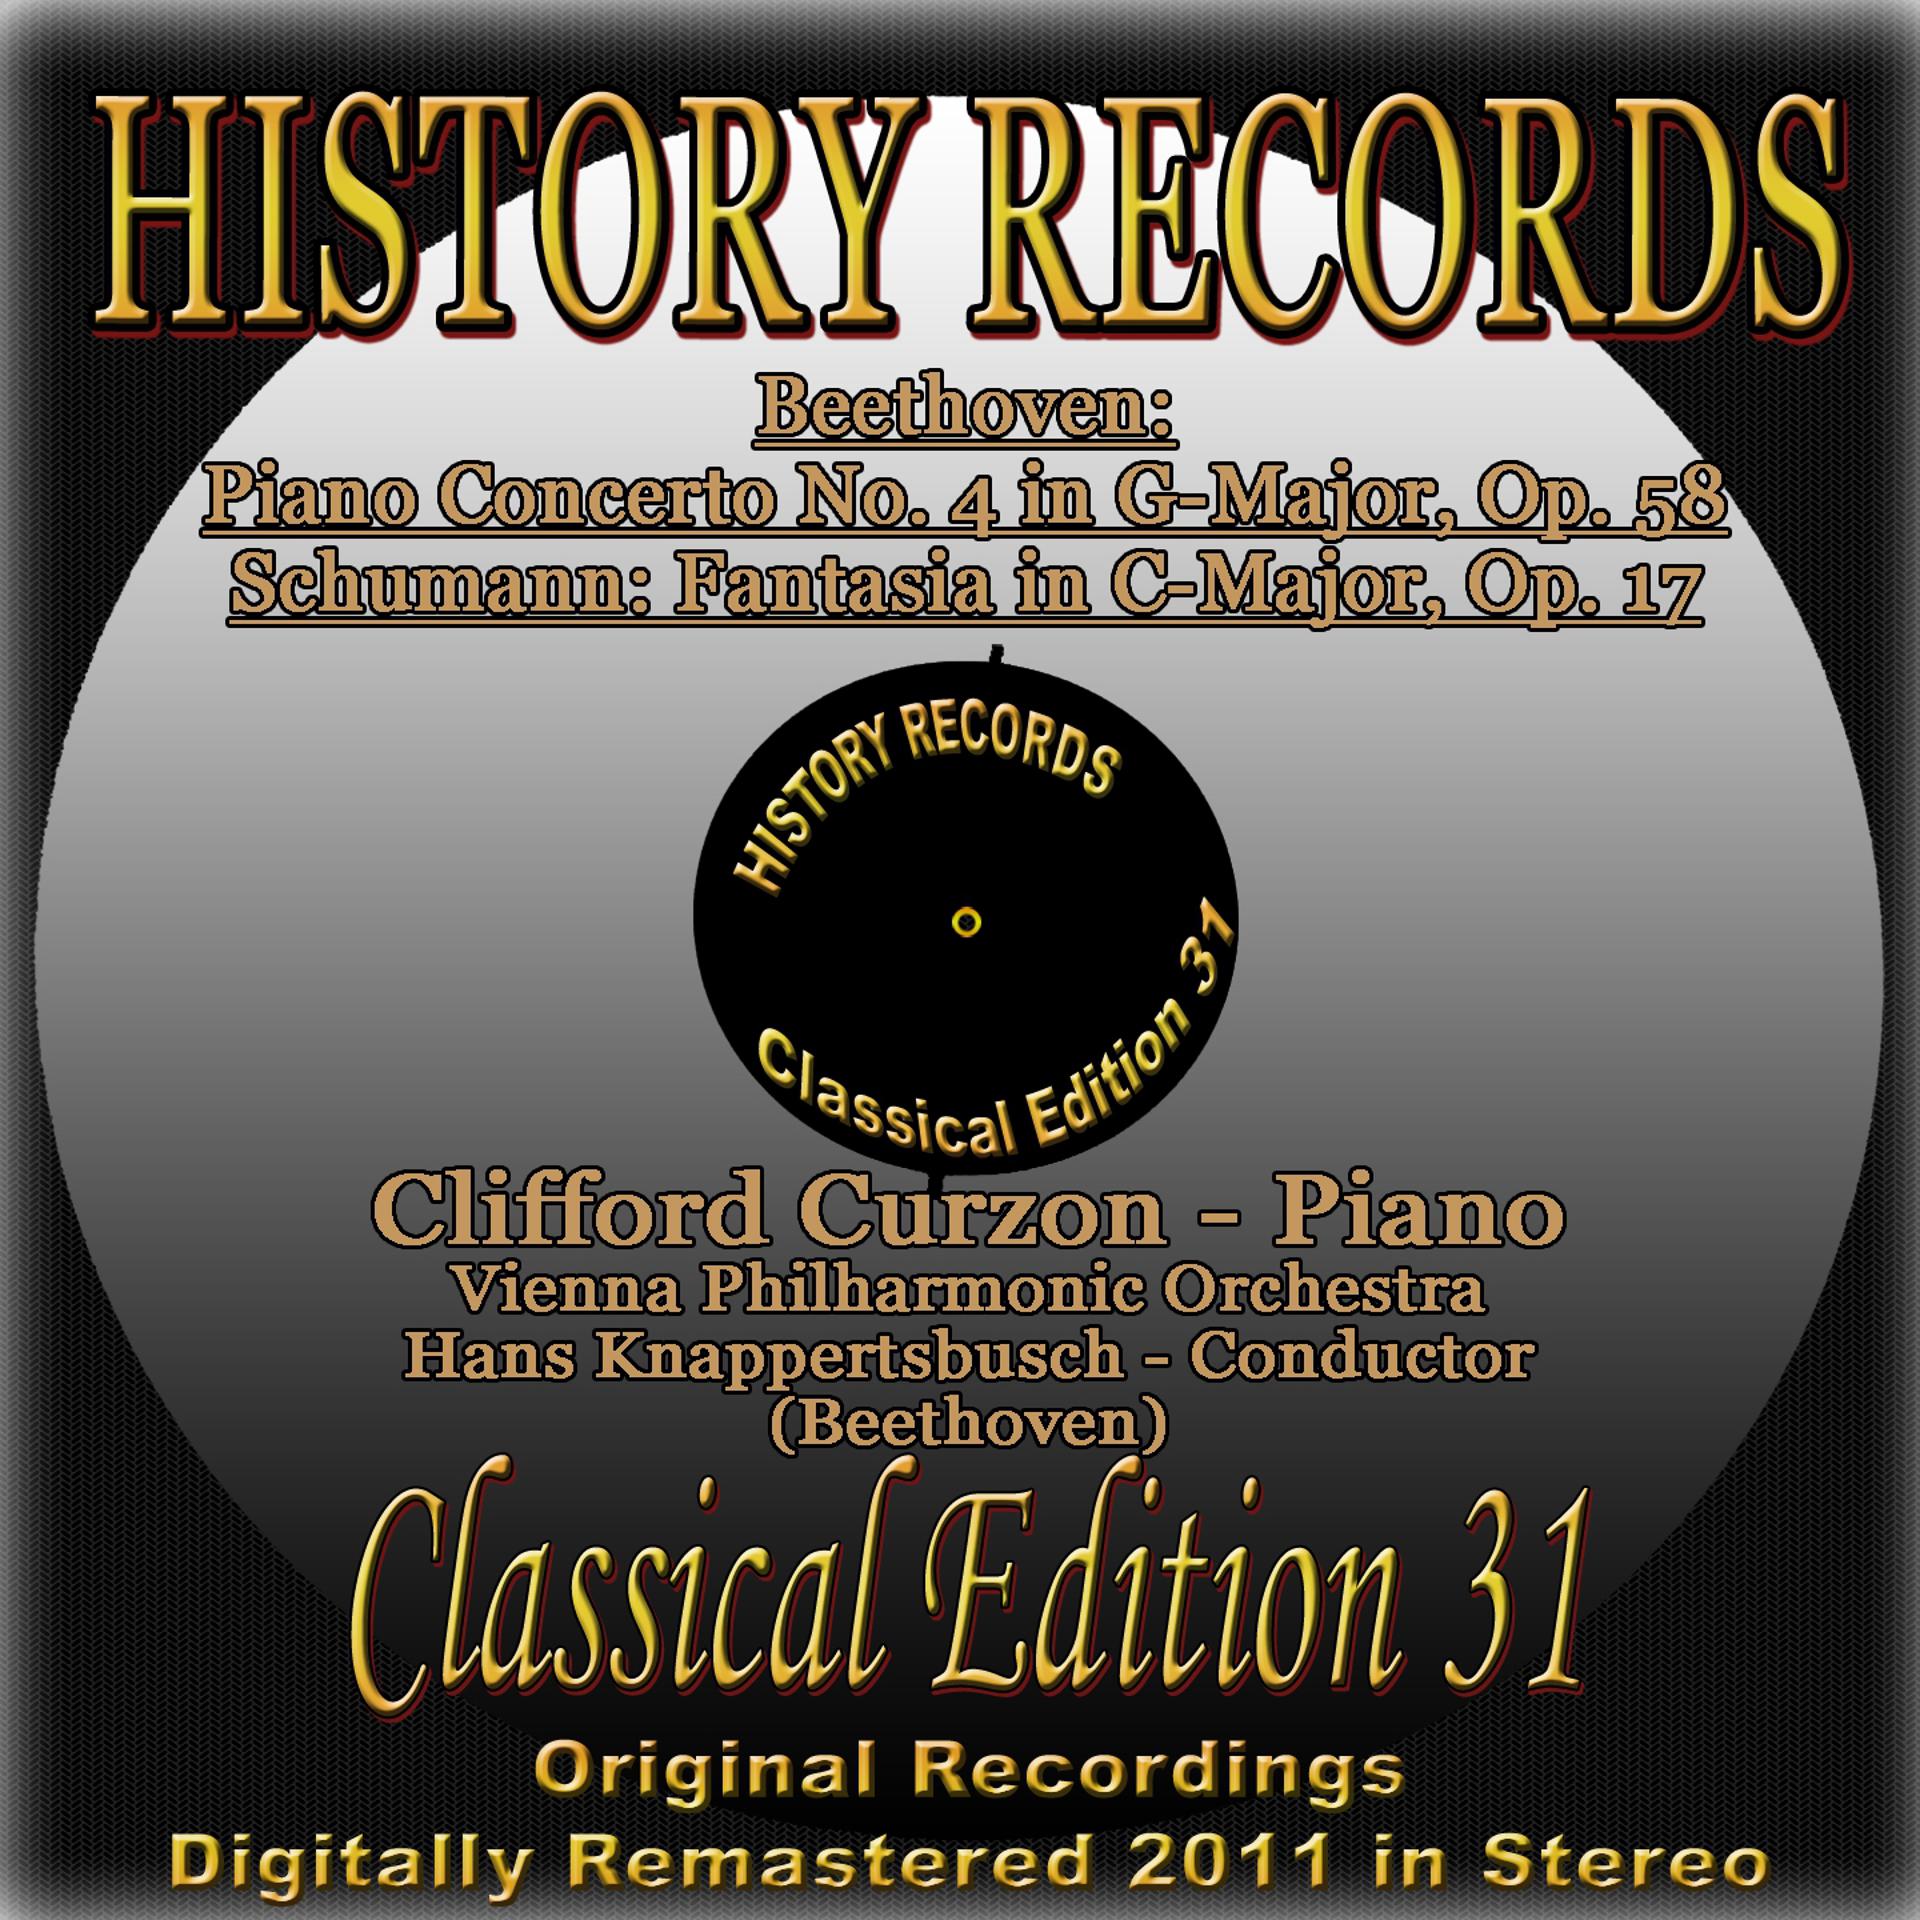 Постер альбома Beethoven: Piano Concerto No 4 in G Major, Op. 58 - Schumann: Fantasia in C Major, Op. 17 (History Records - Classical Edition 31 - Original Recordings Digitally Remastered 2011 in Stereo)